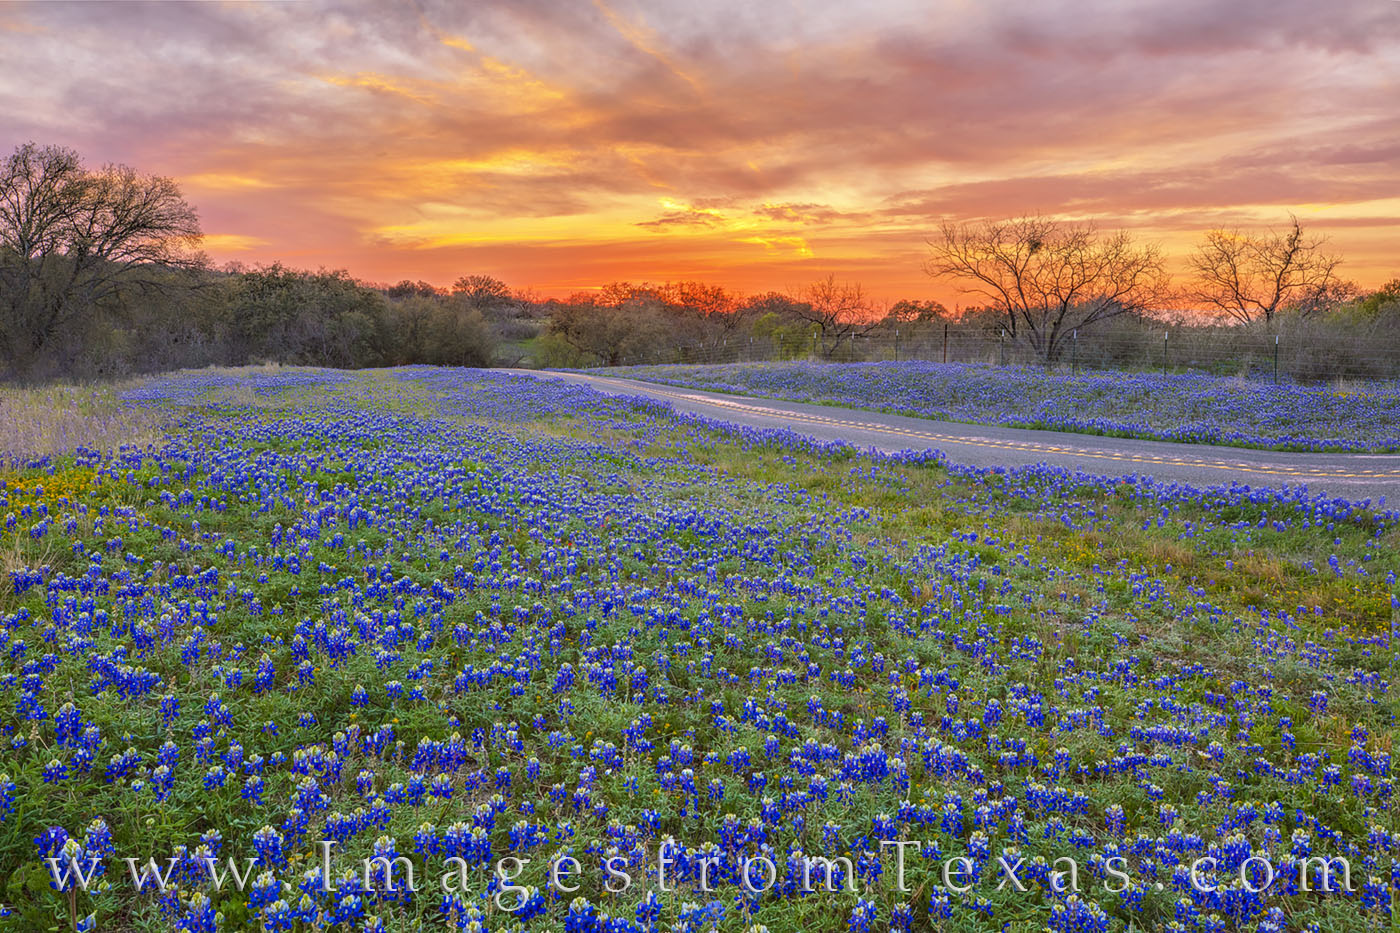 On a lonely stretch of road between Llano and Castel, bluebonnets filled in the roadsides and ditches on a cool late March sunset...